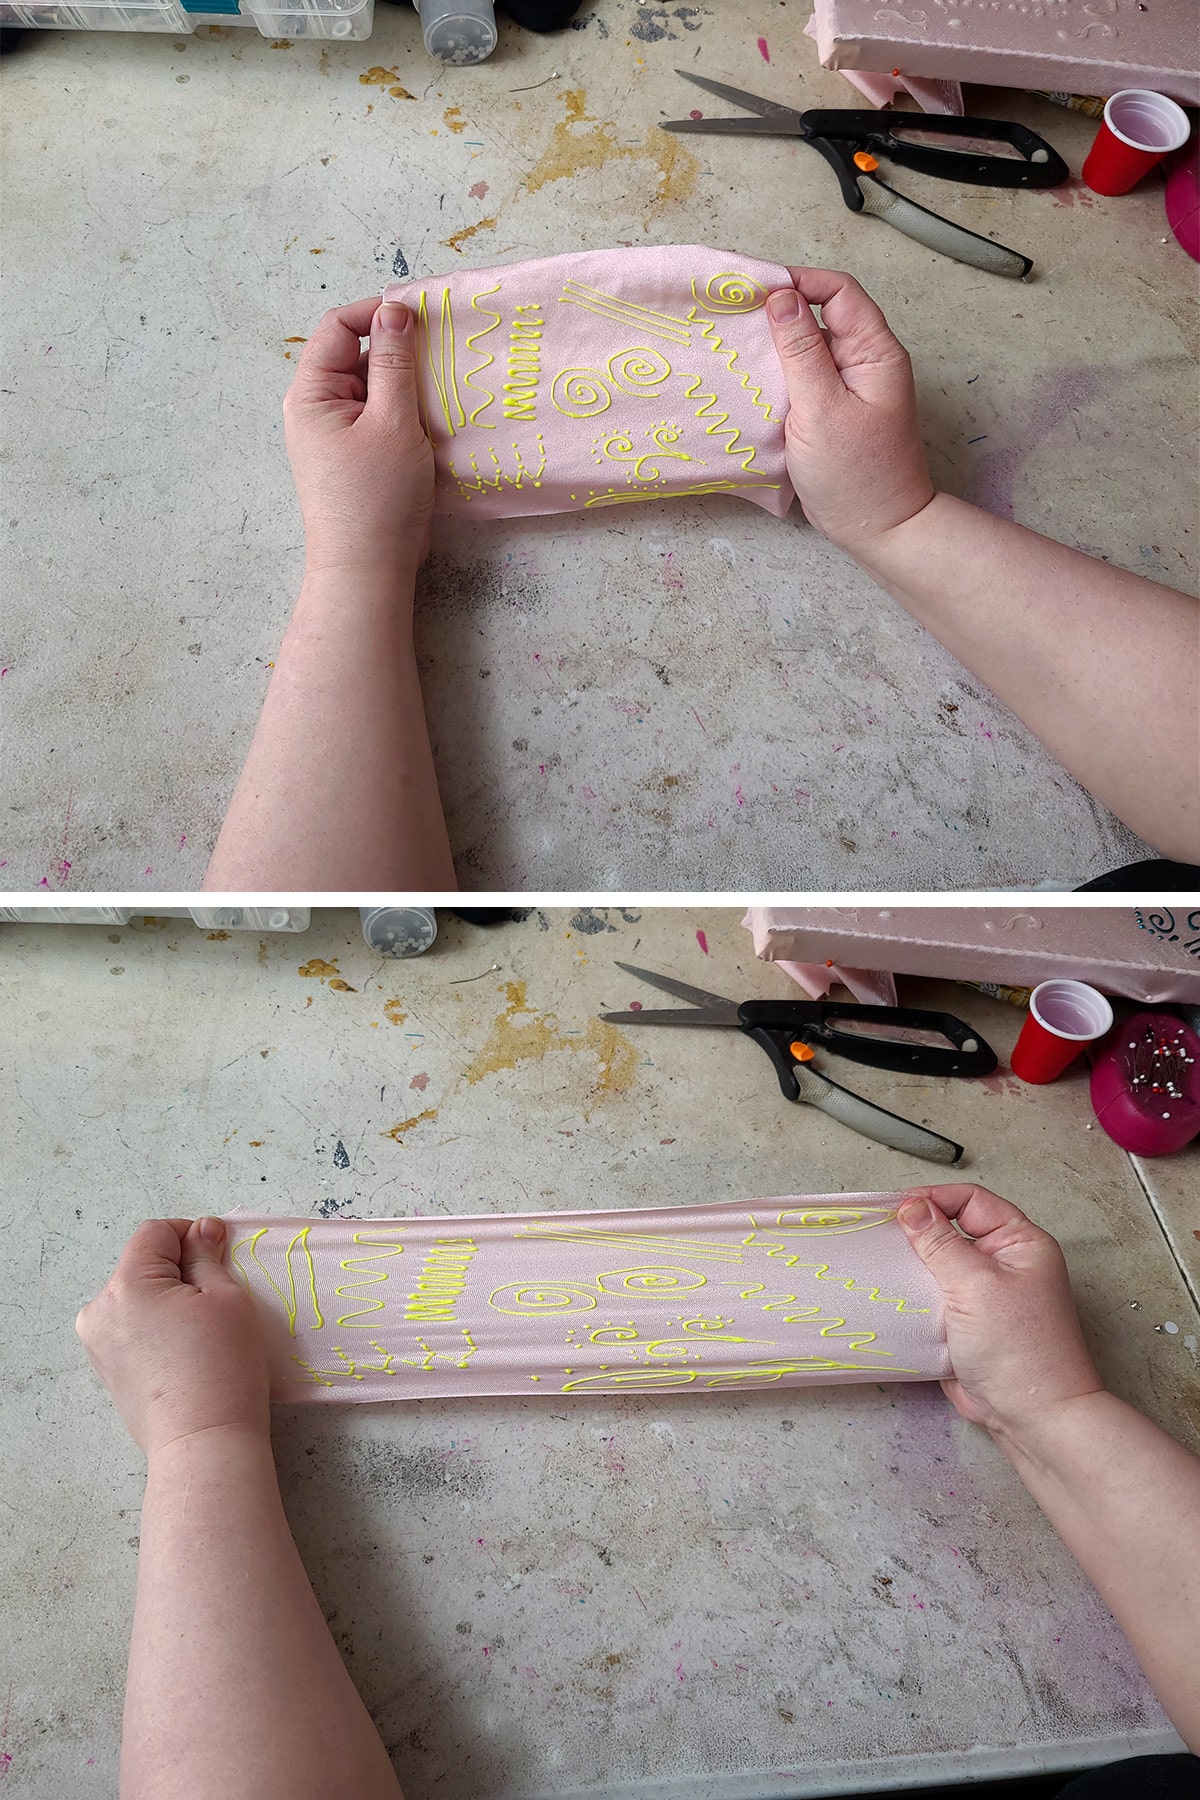 A two part compilation image showing two hands holding a piece of light pink spandex with neon yellow stretch paint swirls on it. The top image shows it relaxed, the second image shows the fabric being stretched to its limit.